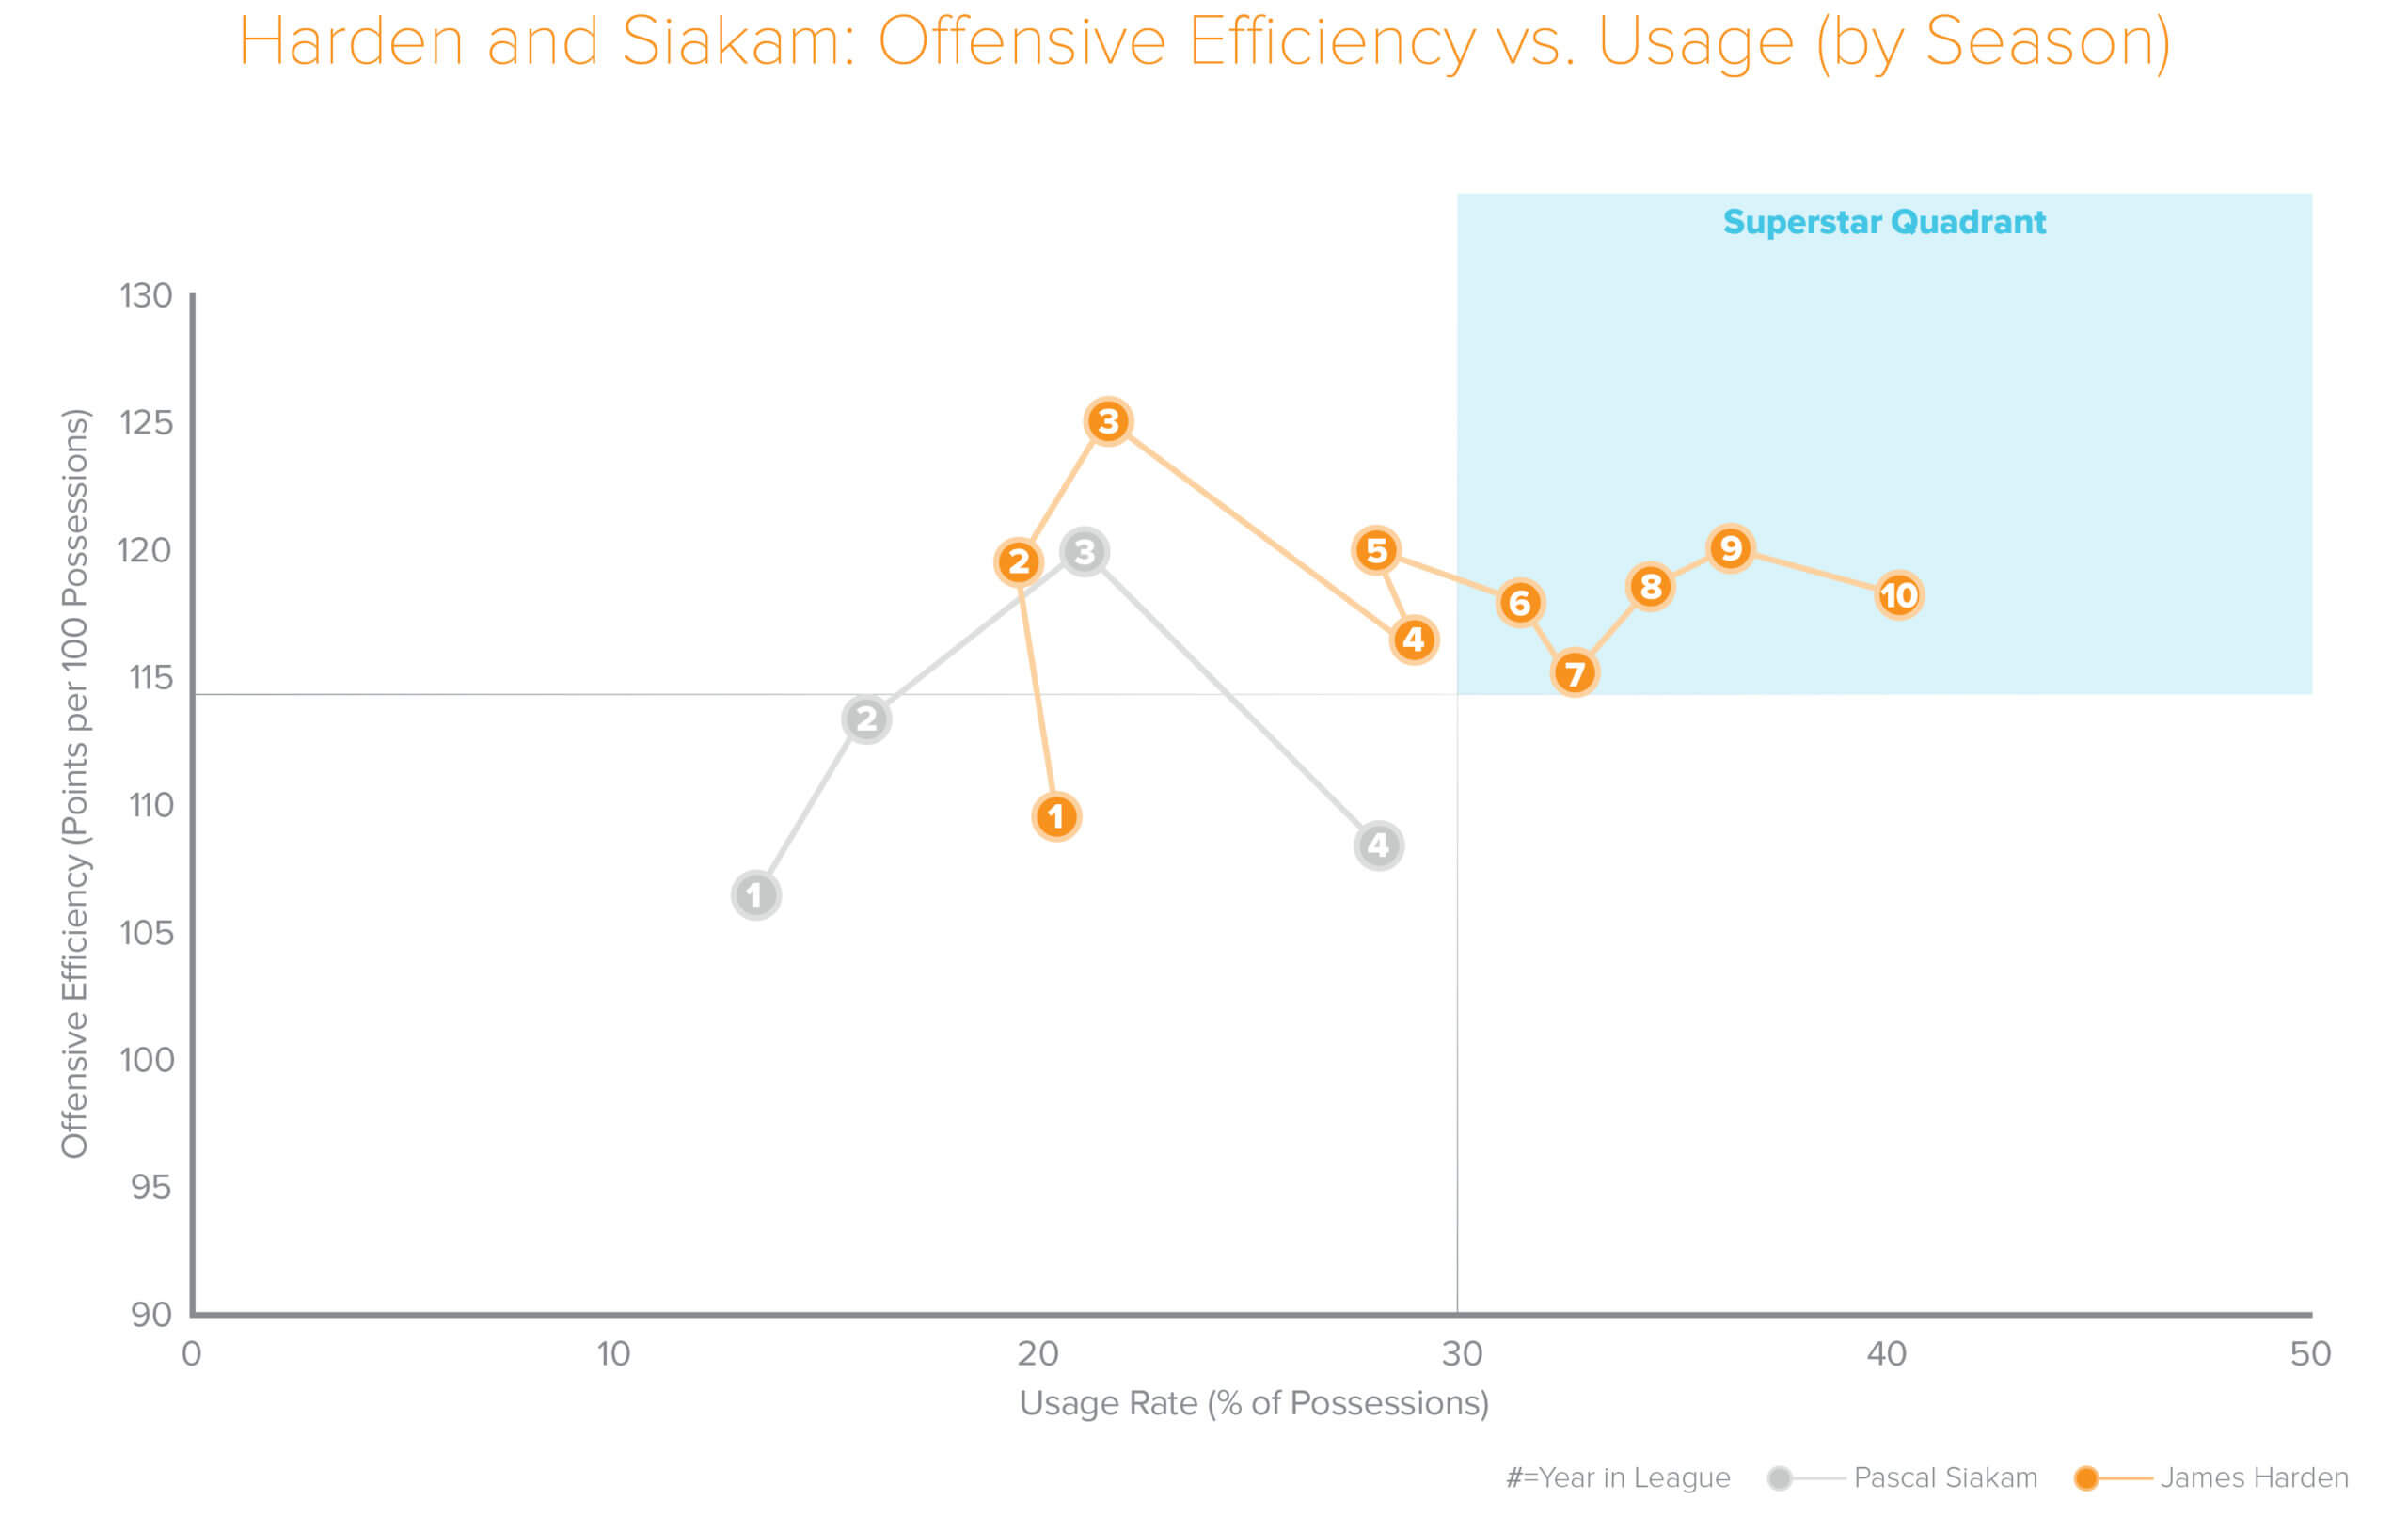 Harden and Siakam: Offensive Efficiency vs Usage by Season